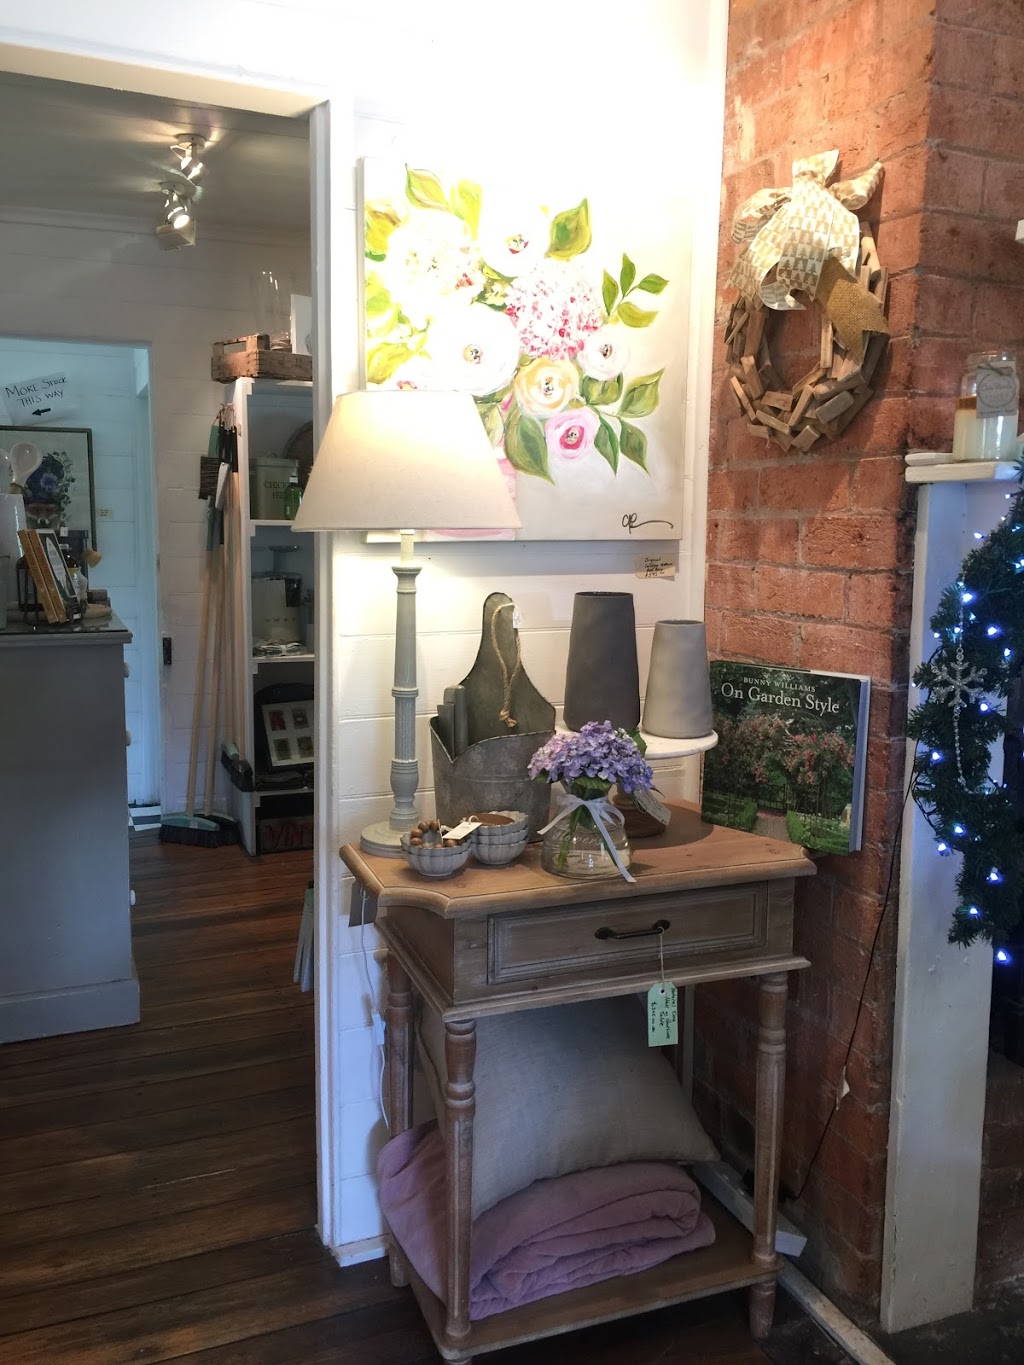 The Summerhouse Store | Whare Tau - Cottage, 2 Exeter Rd, Exeter NSW 2579, Australia